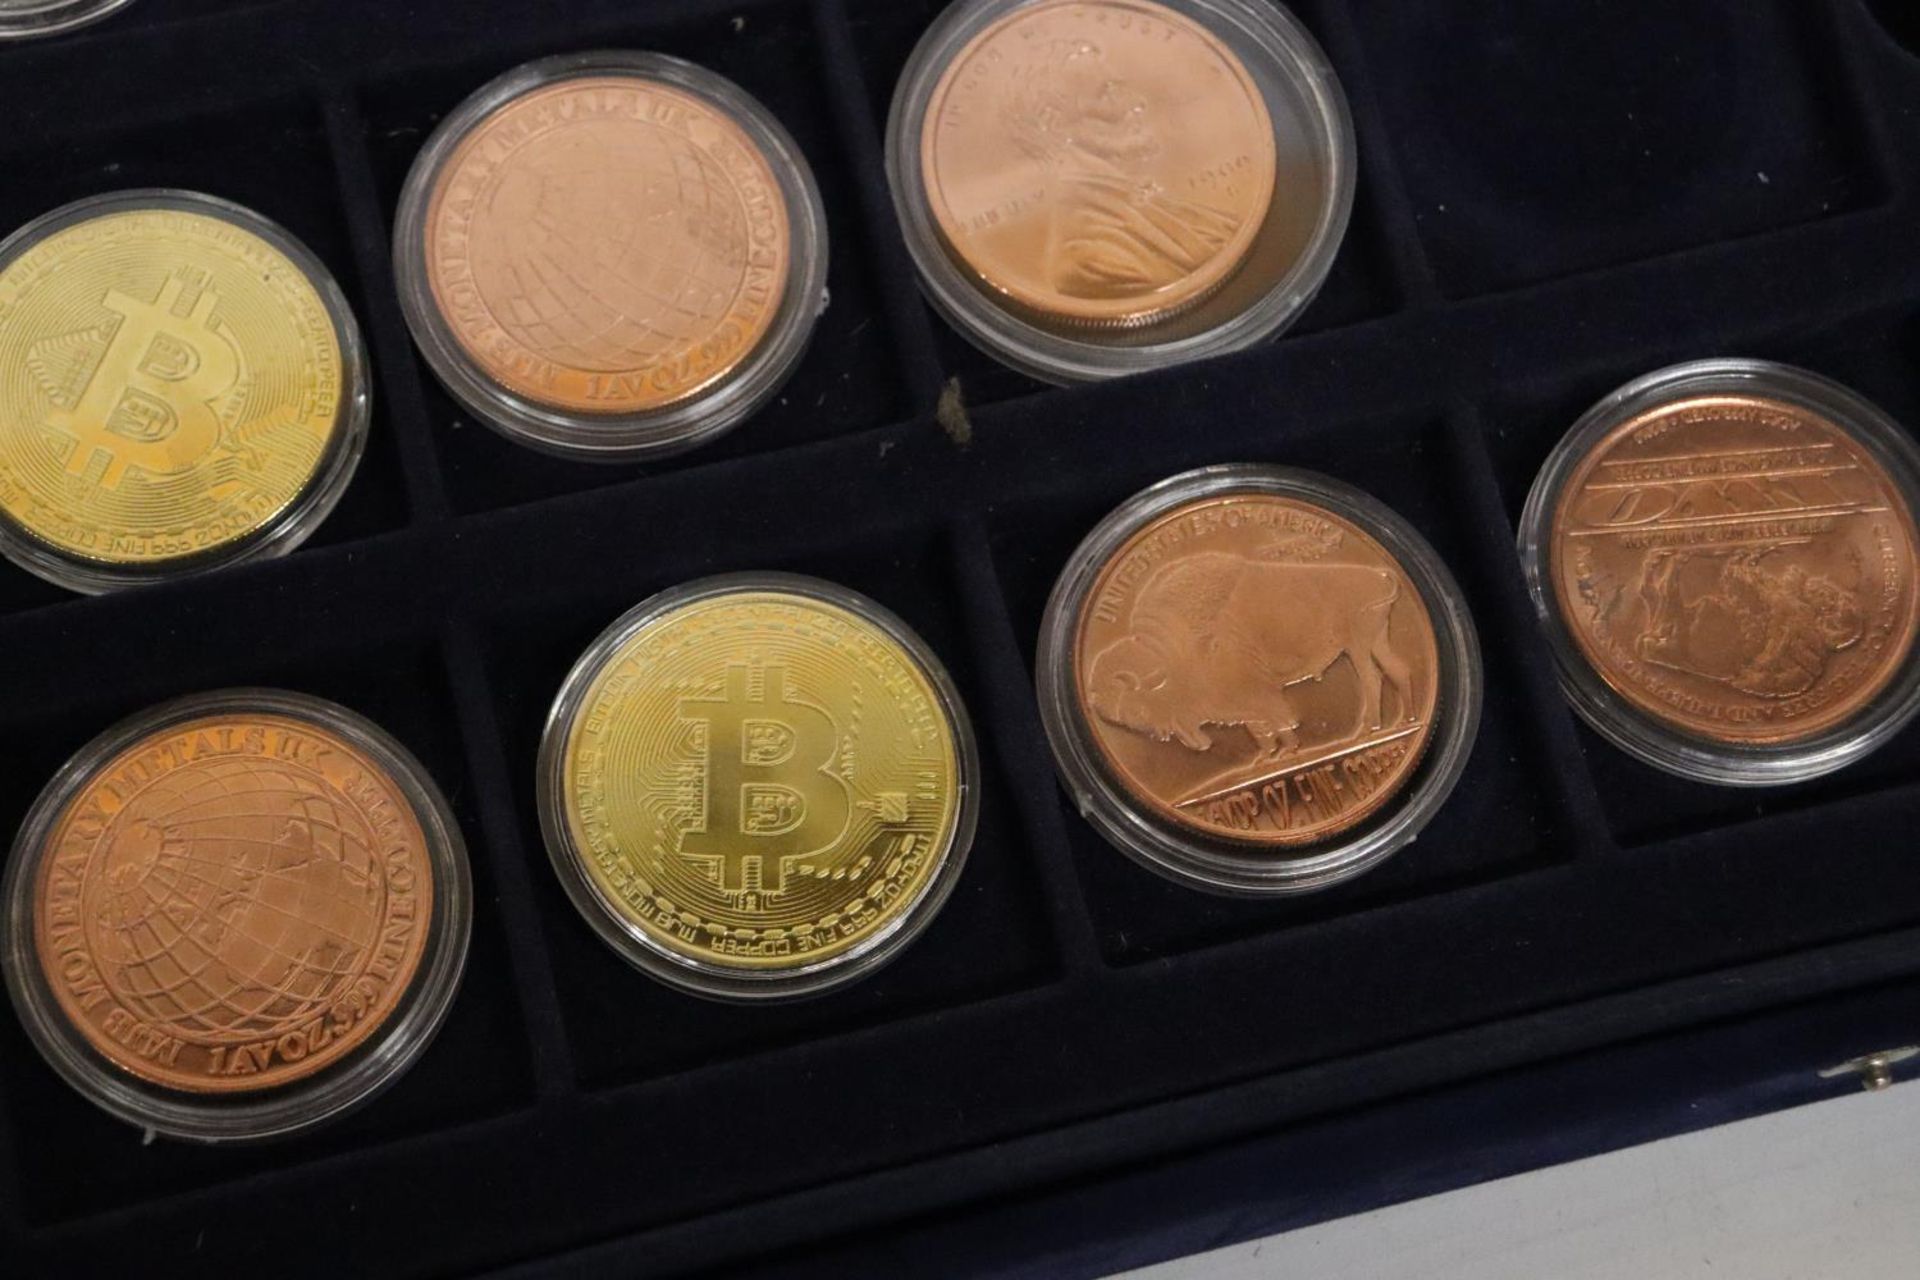 A CASE CONTAINING 11 USA LARGE COPPER COINS, EACH ENCAPSULATED - Image 5 of 6